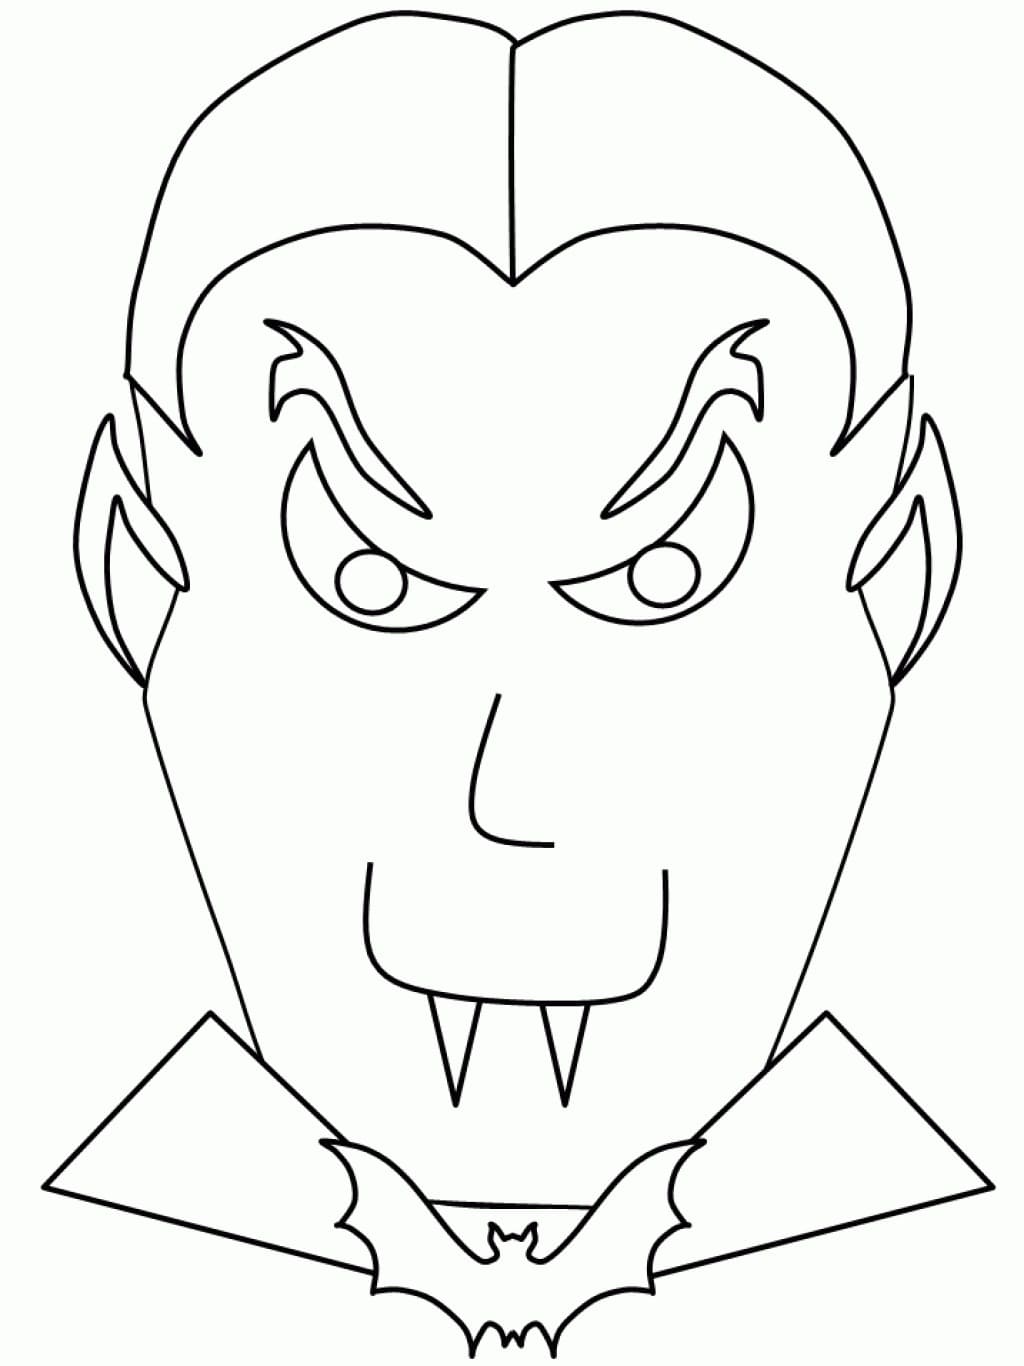 Halloween Vampire Image Coloring Page